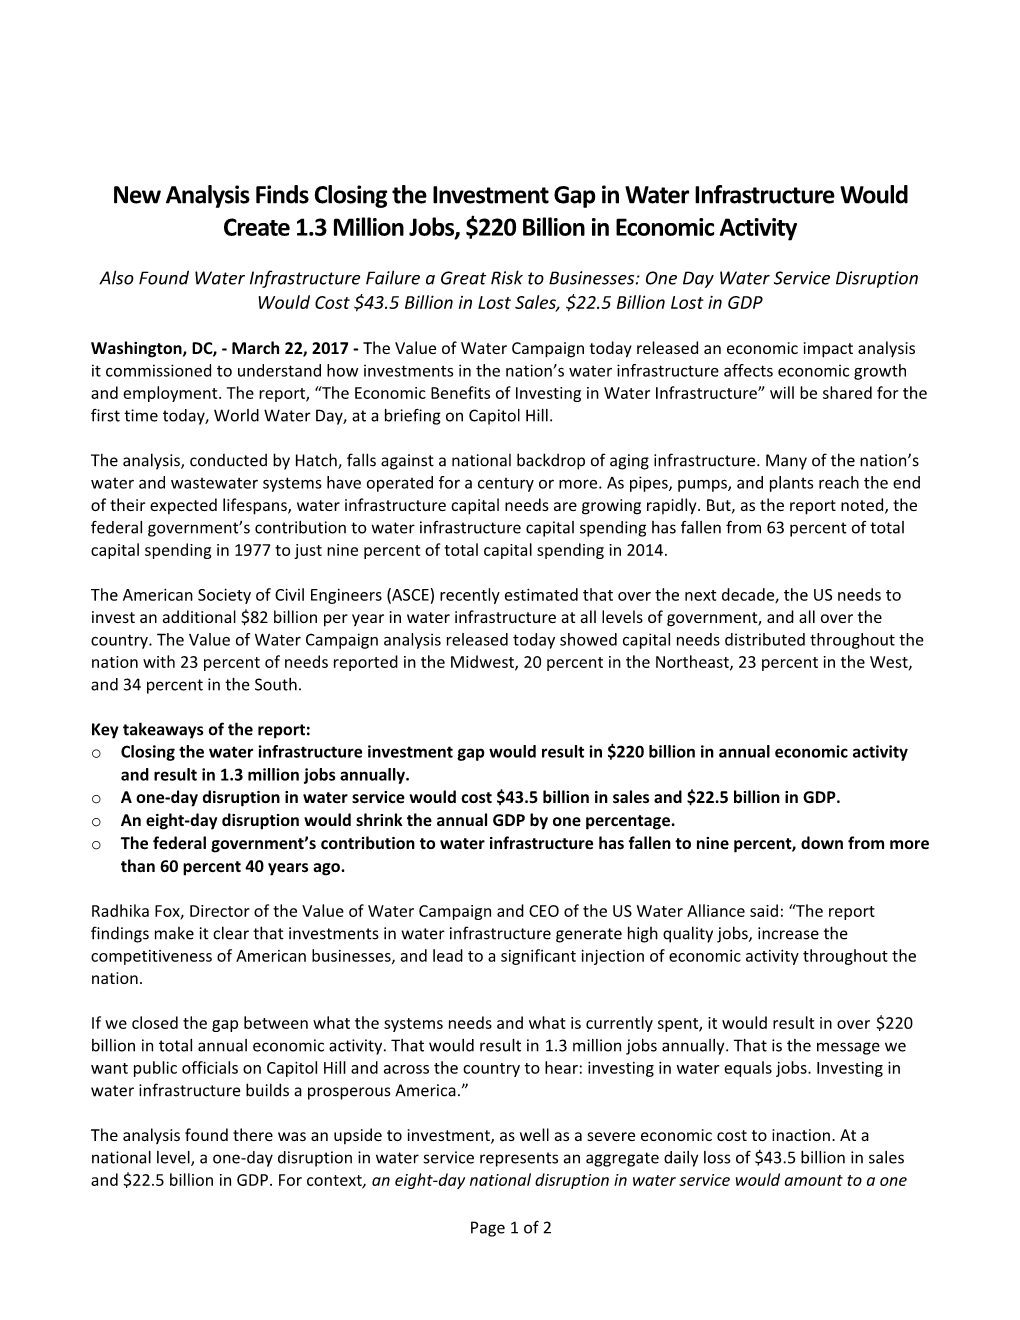 New Analysis Finds Closing the Investment Gap in Water Infrastructure Would Create 1.3